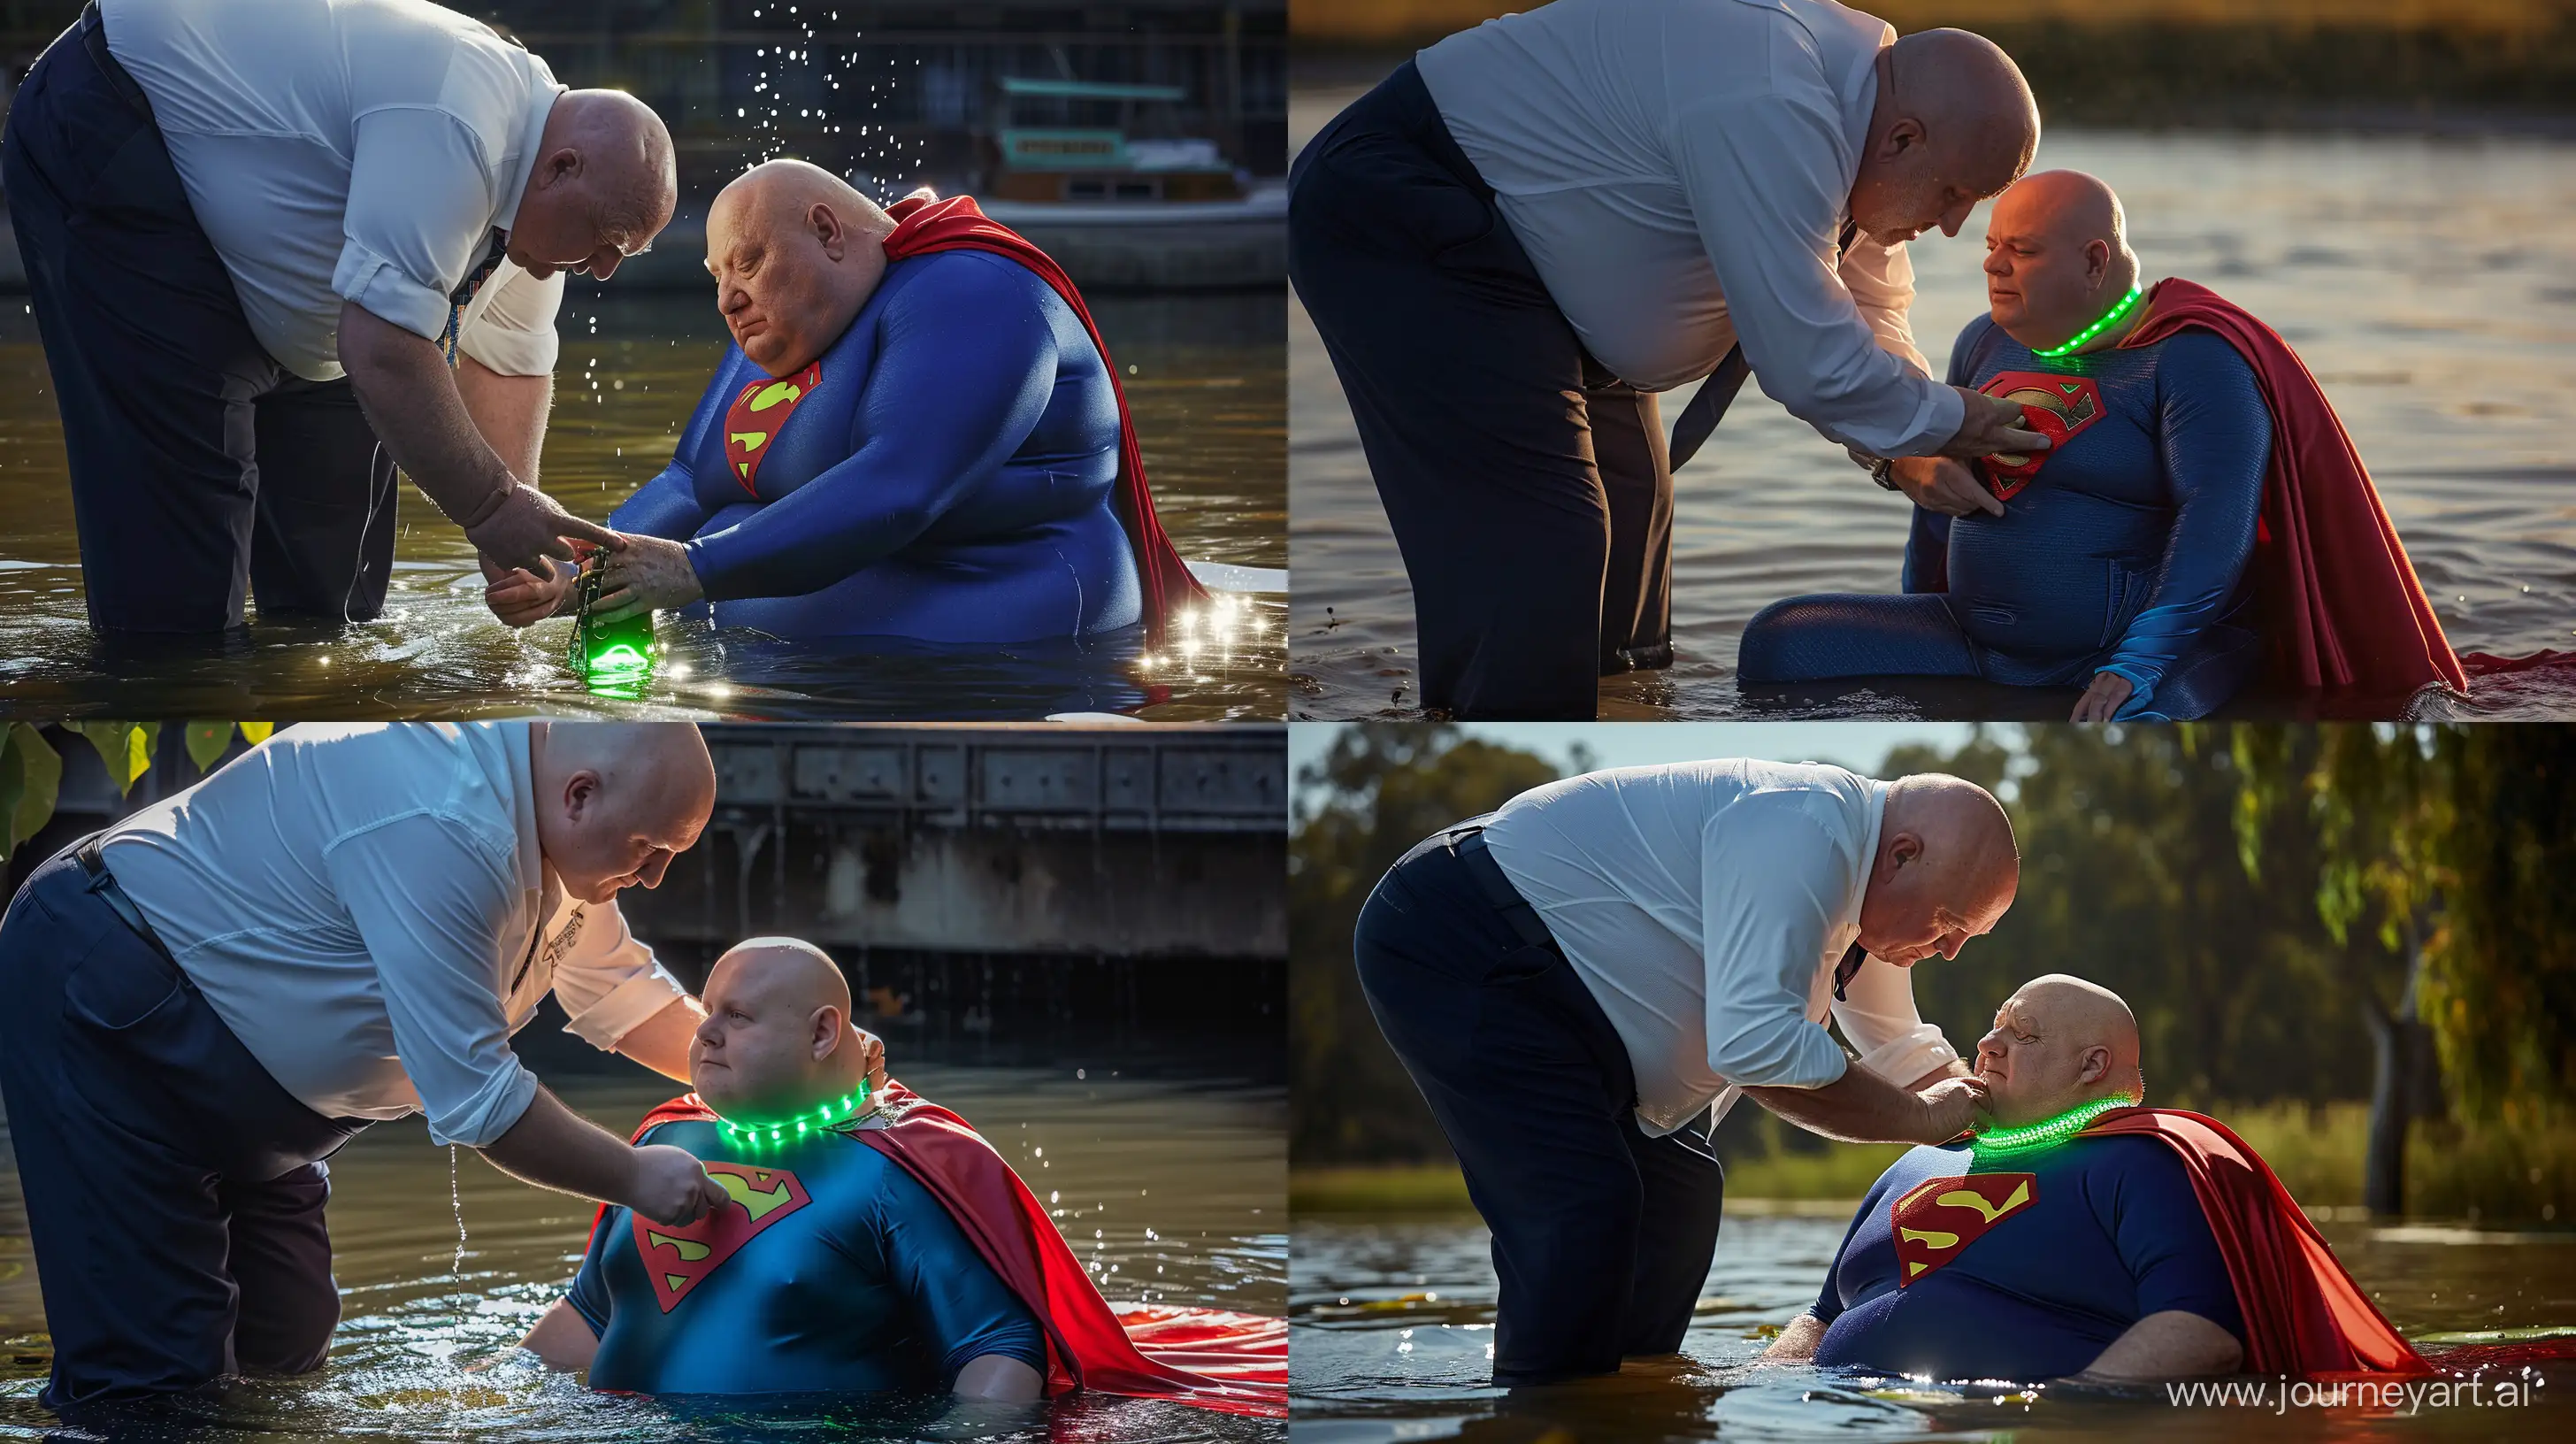 Elderly-Duos-Hilarious-Water-Adventure-Superman-Costume-and-Glowing-Dog-Collar